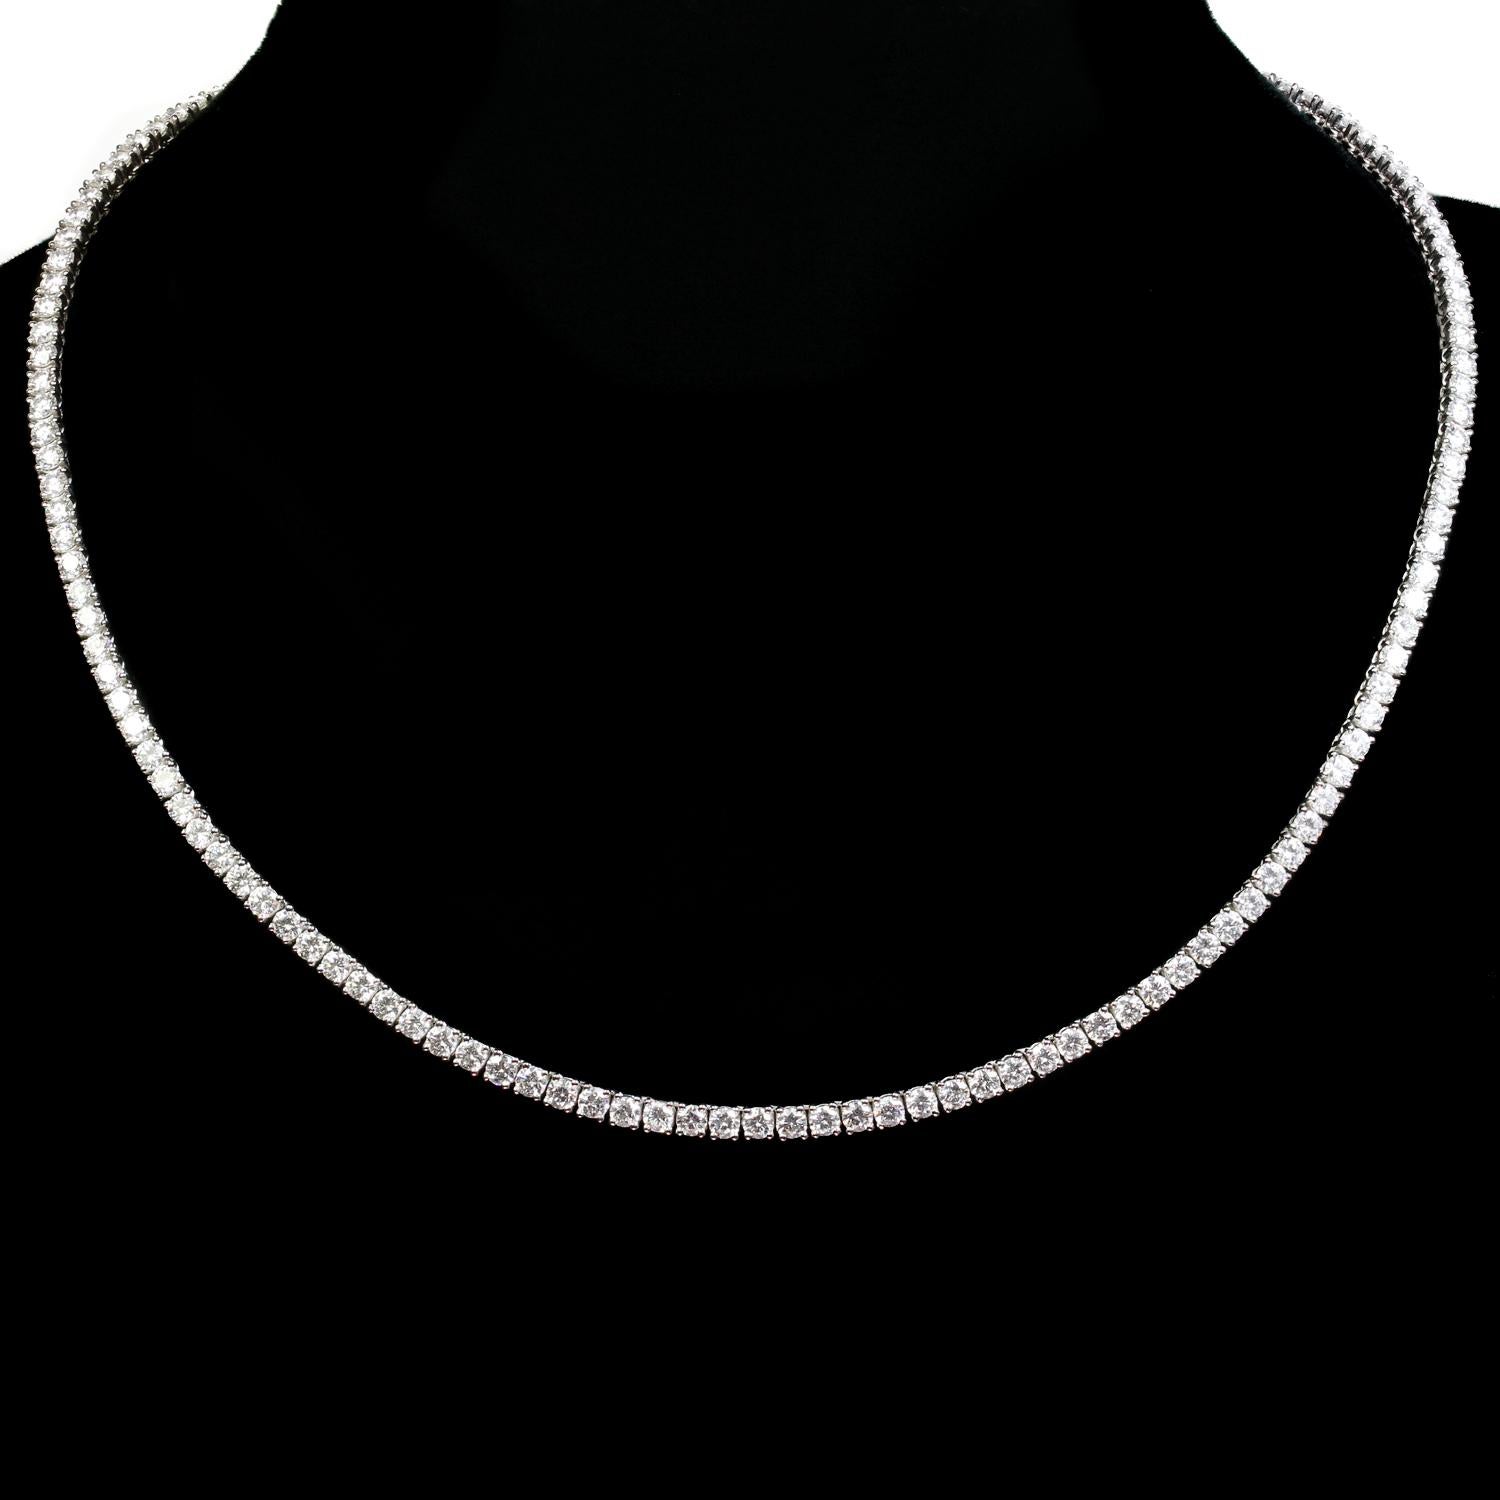 This exquisite Essential Lines  Cartier necklace features a classic tennis design crafted in 18k white gold and set with brilliant-cut round D-F VVS1-VVS2 diamonds of an estimated 10.00 carats. Made in France circa 2000s. Measurements: 0.11